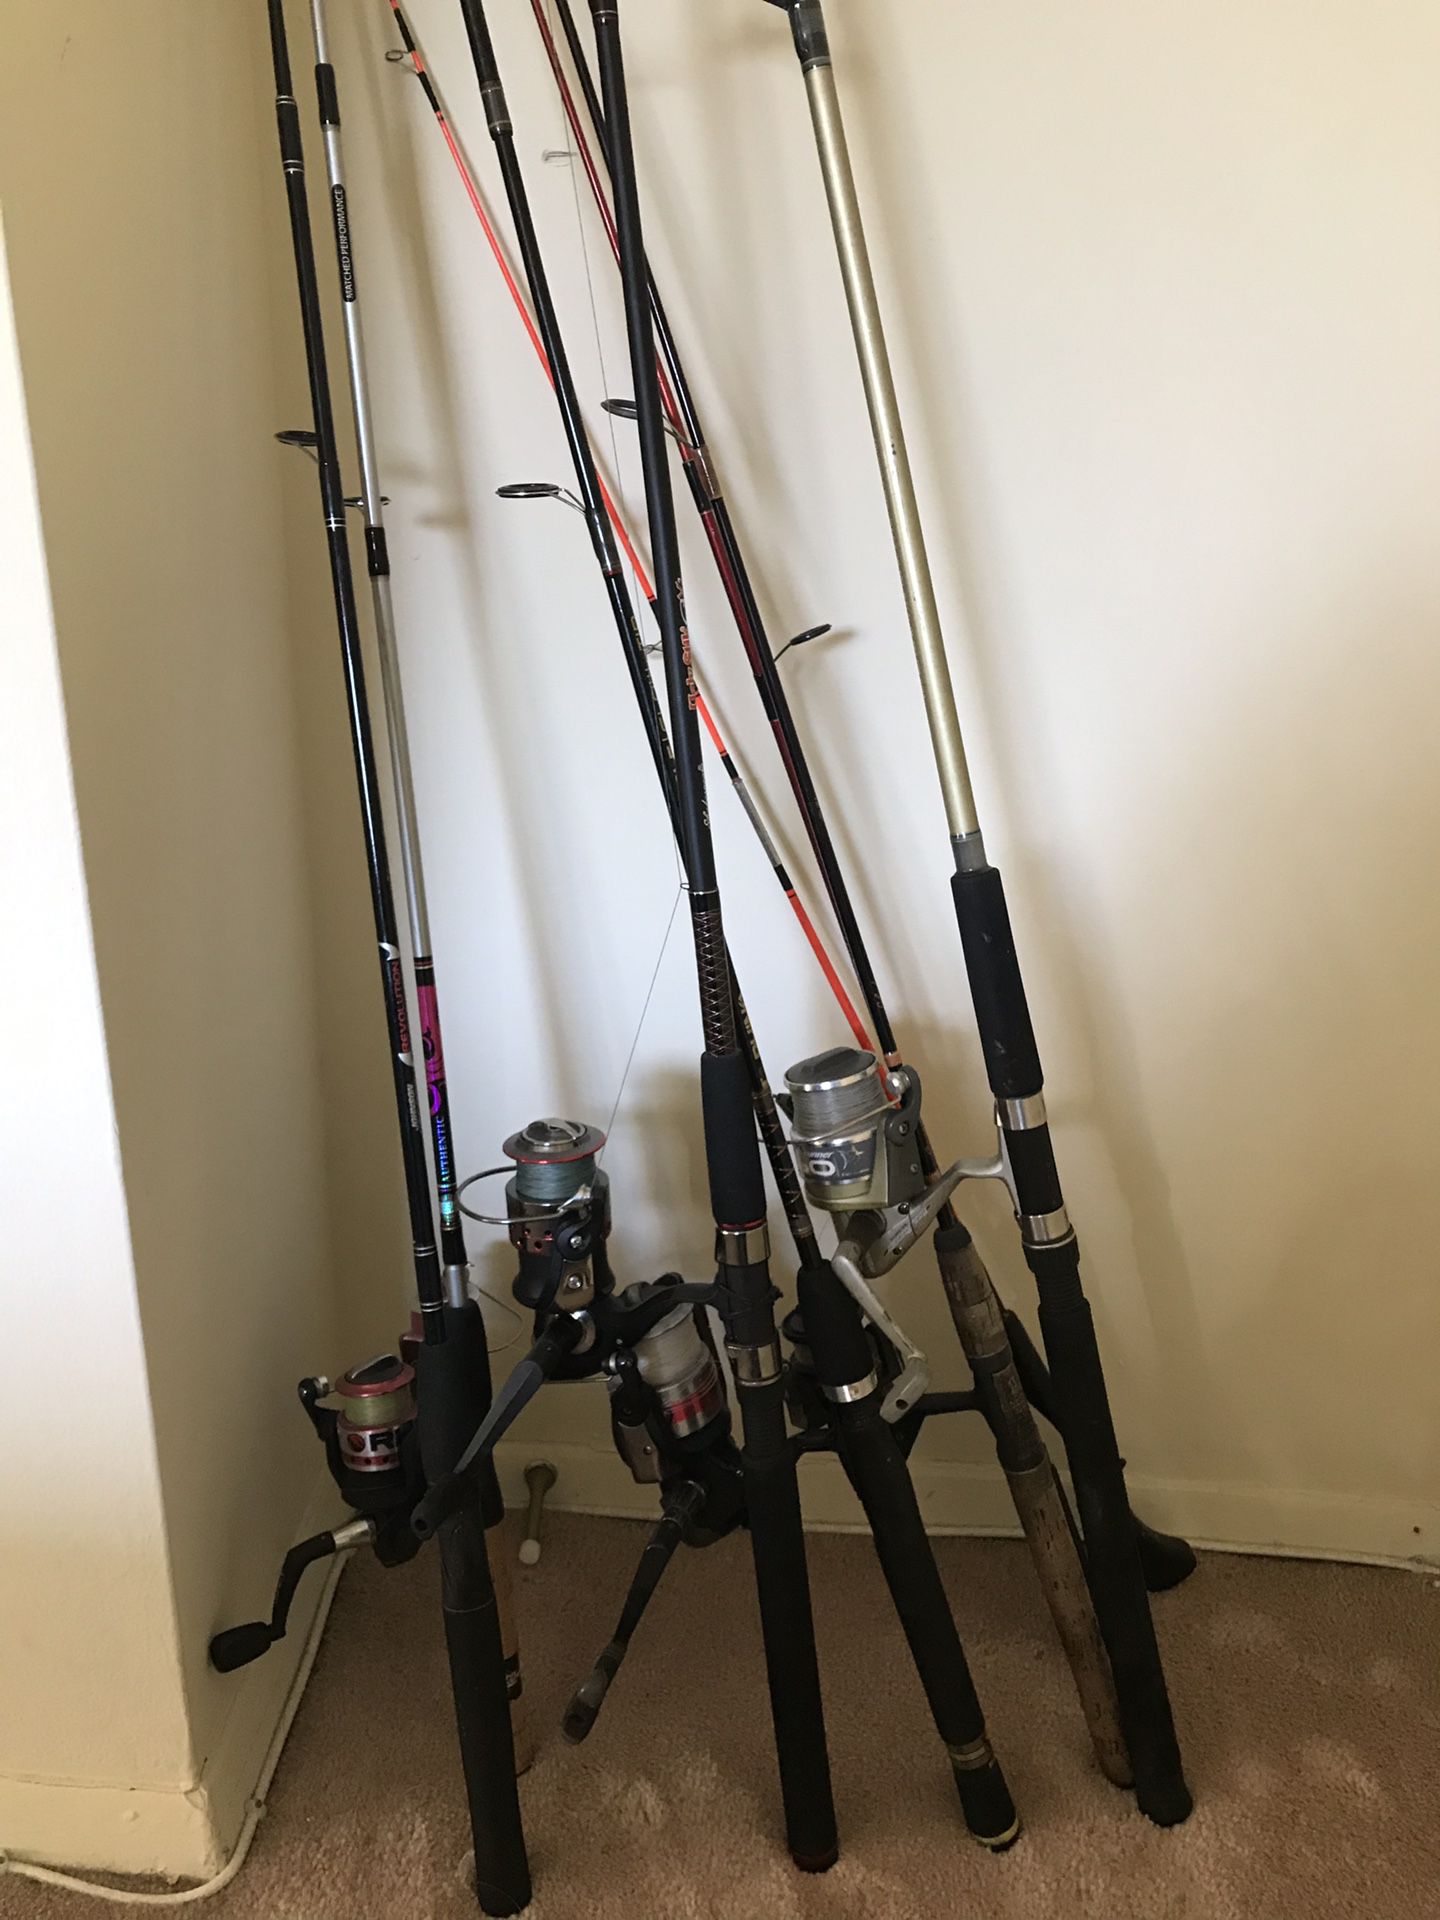 Fishing rods and equipments